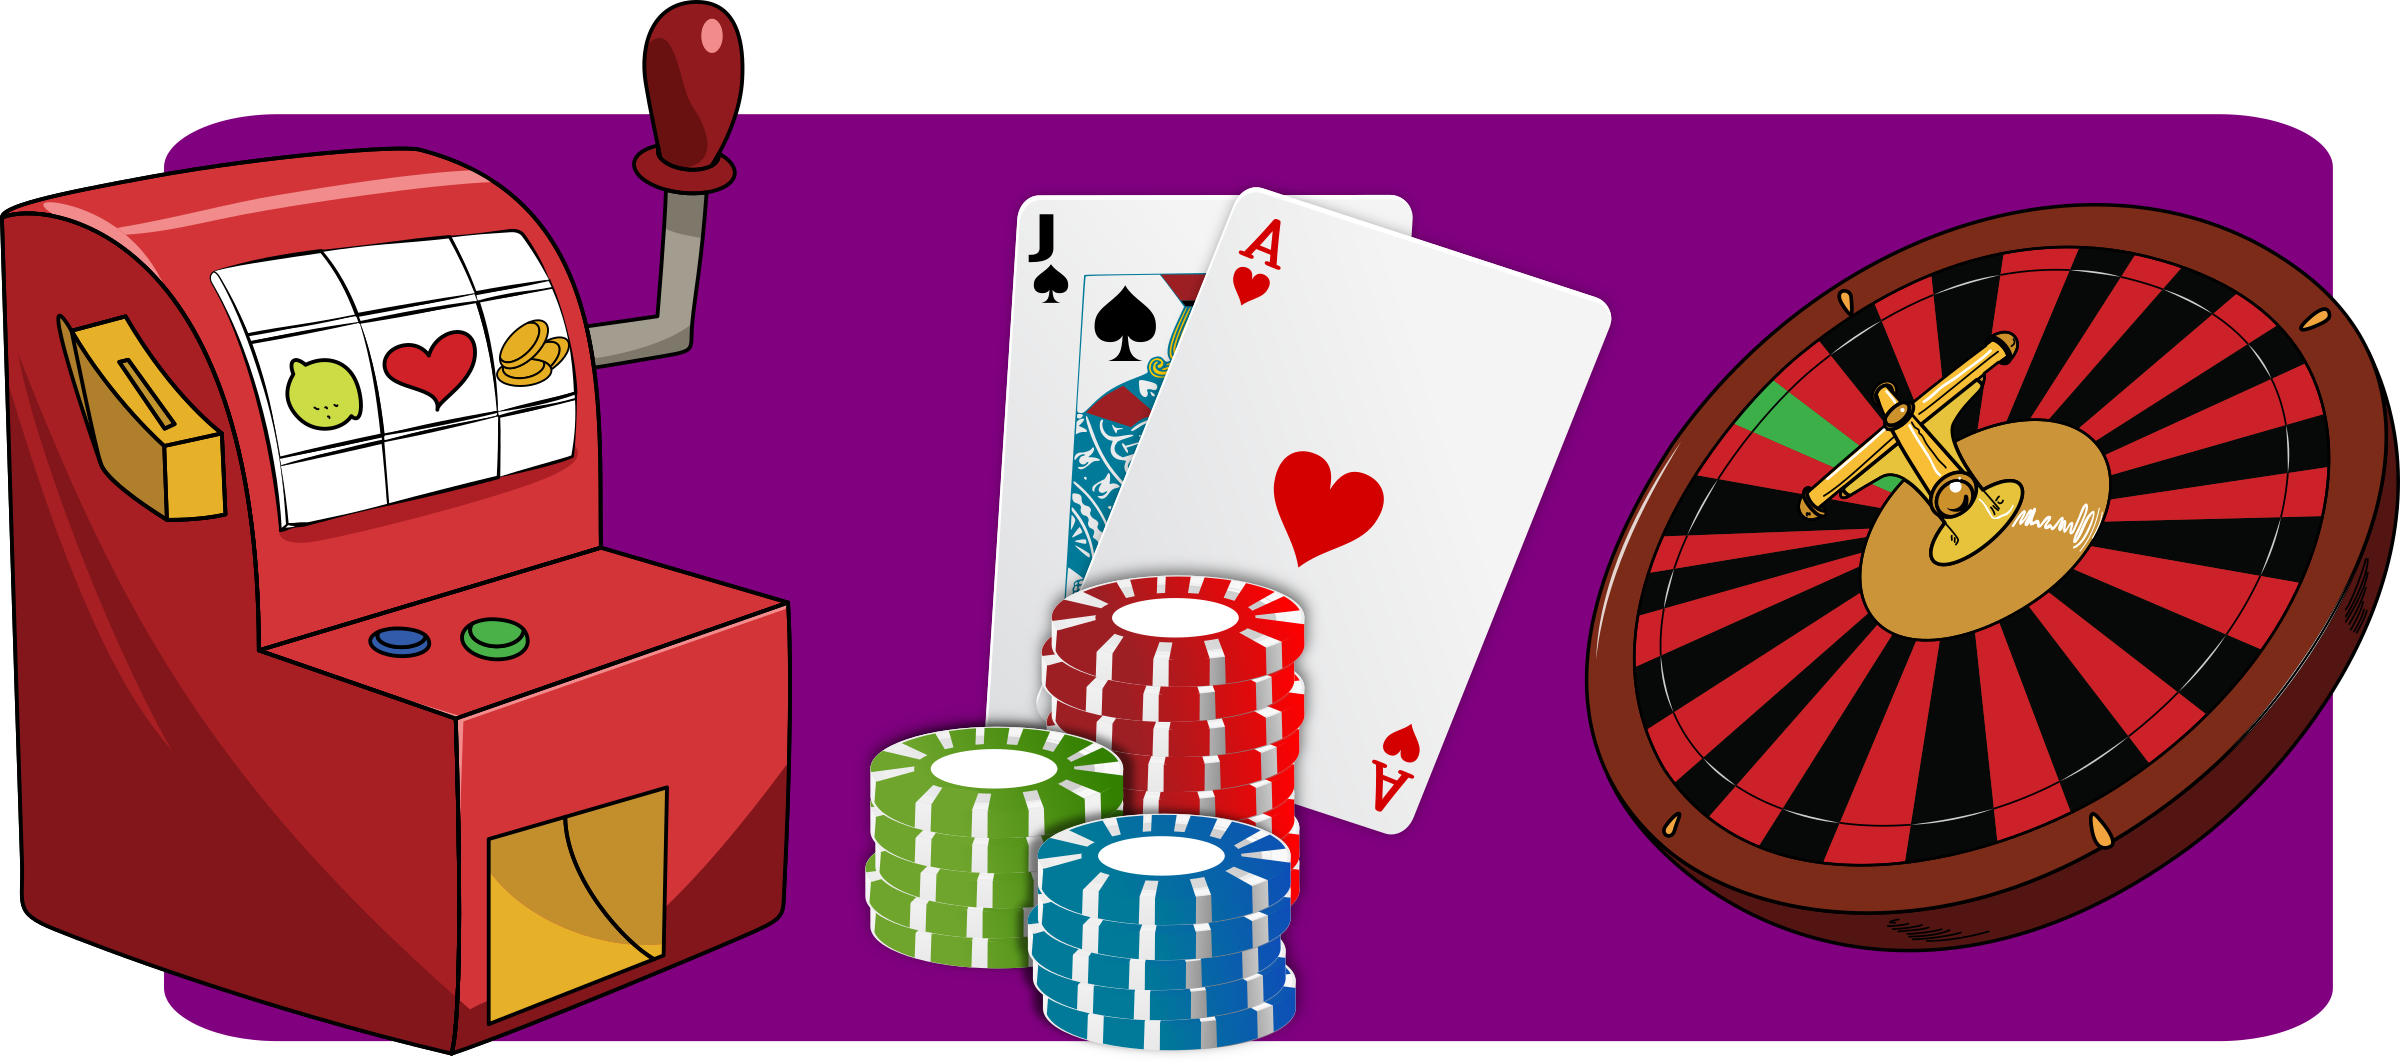 slot-machines-cards-chips-and-dart-board-vector-clipart.png